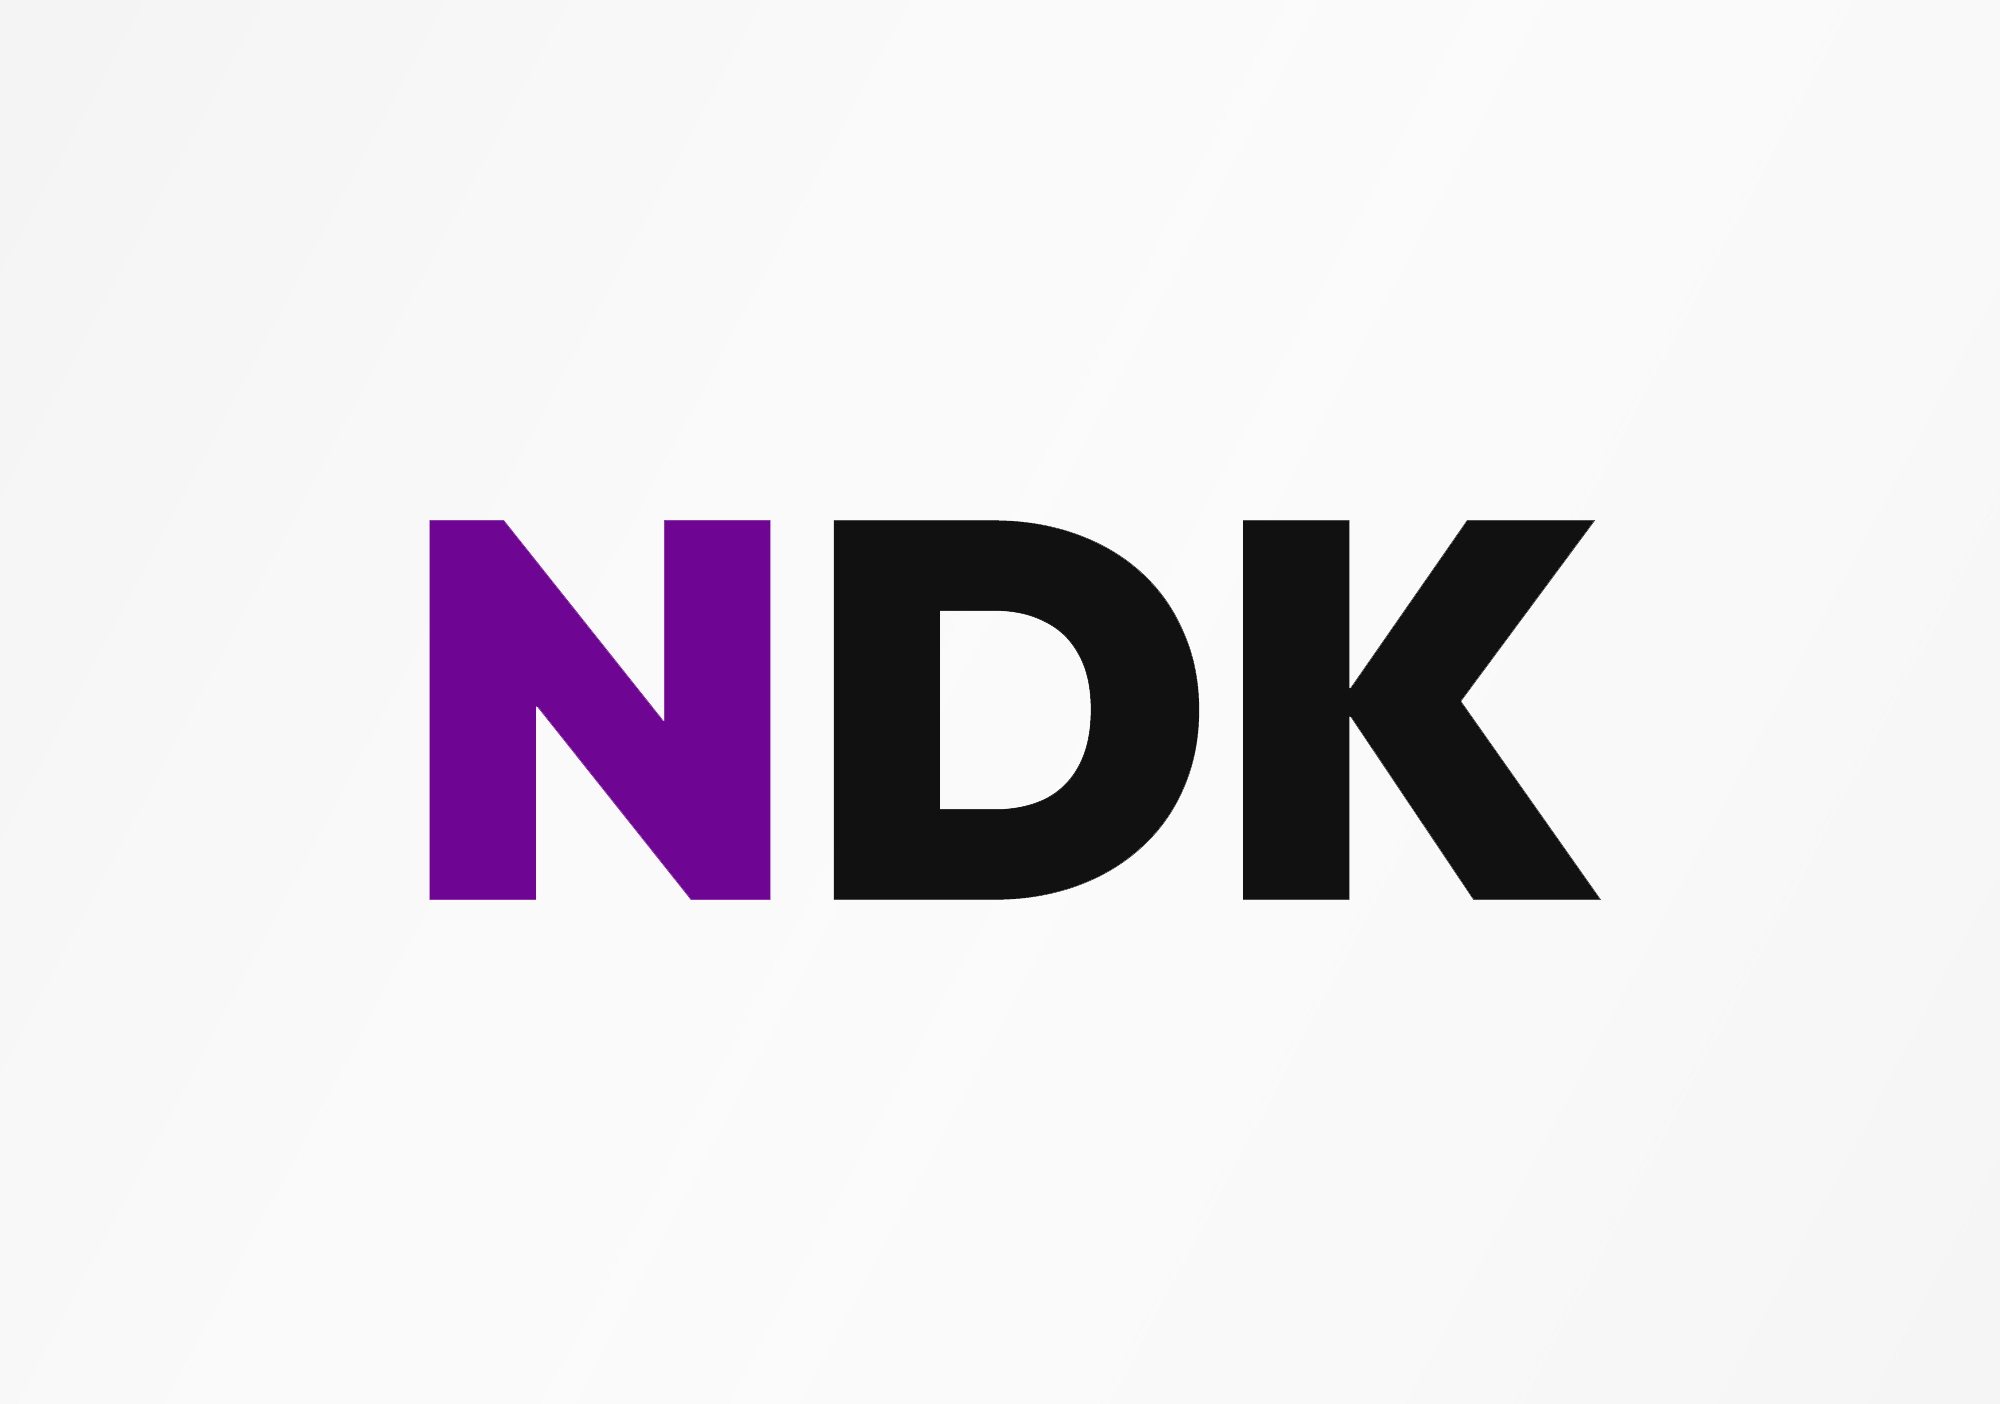 NDK v2.6.0: Improved Outbox Model's Relay Selection & Other Improvements